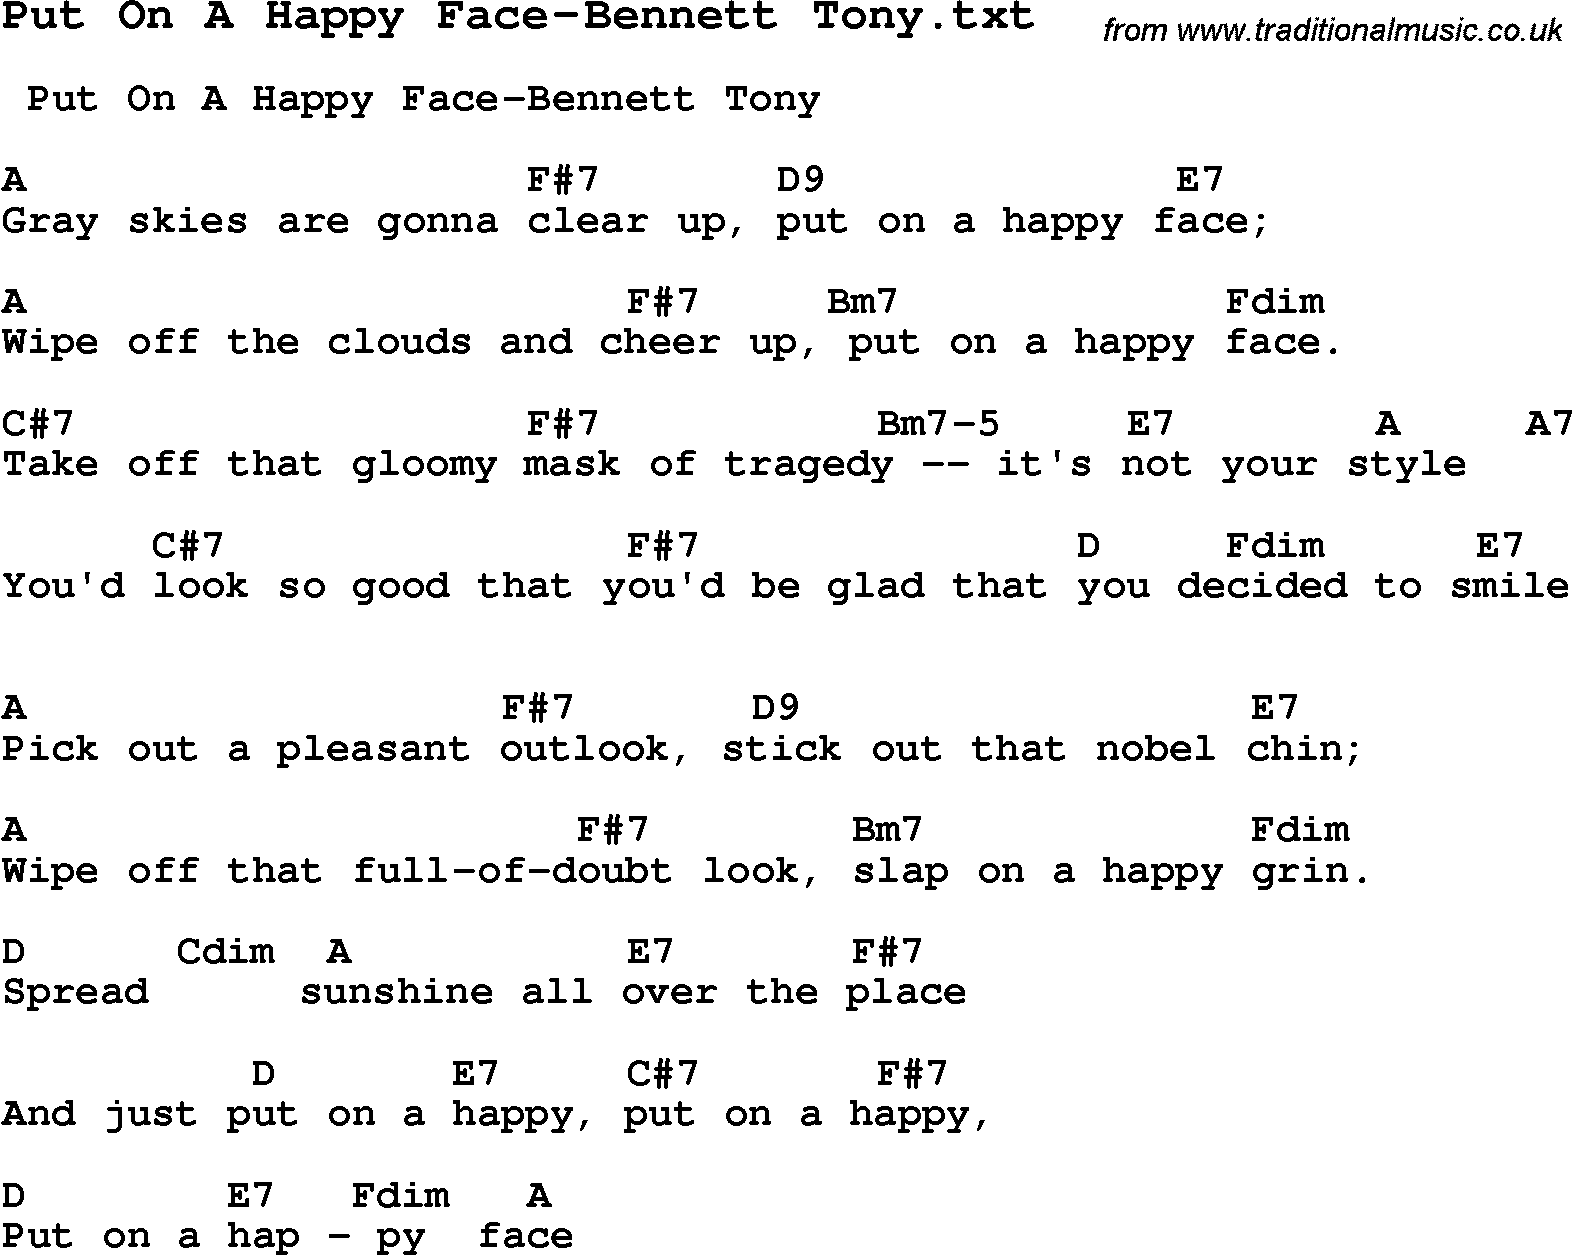 Jazz Song from top bands and vocal artists with chords, tabs and lyrics - Put On A Happy Face-Bennett Tony